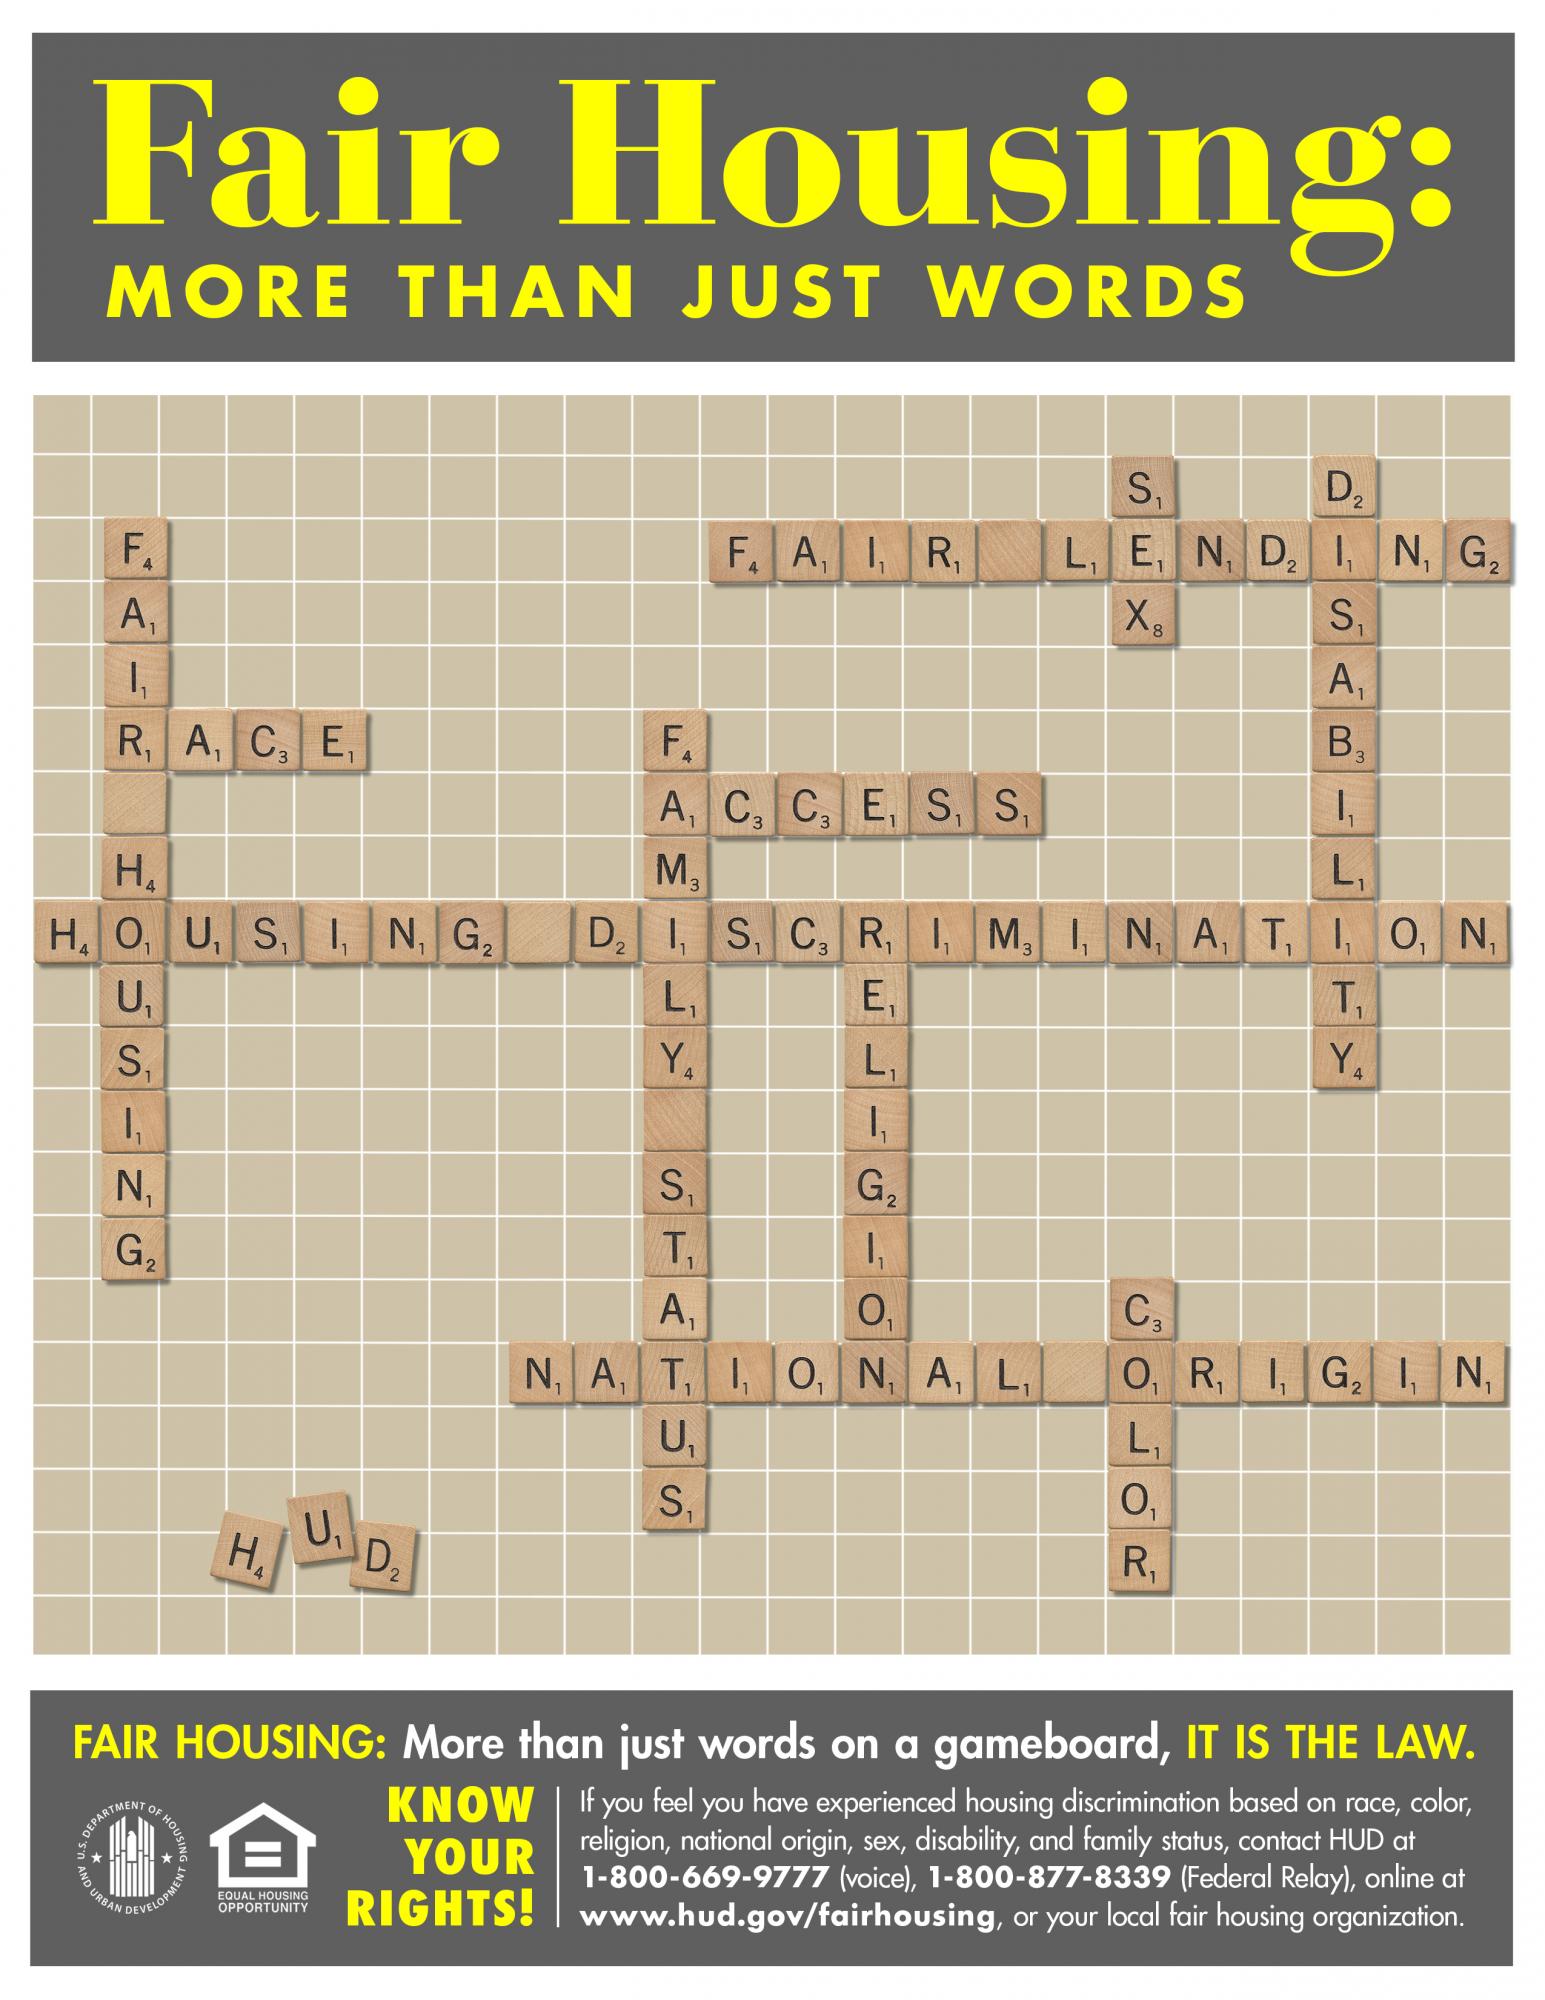 fai housing month poster - more than just words